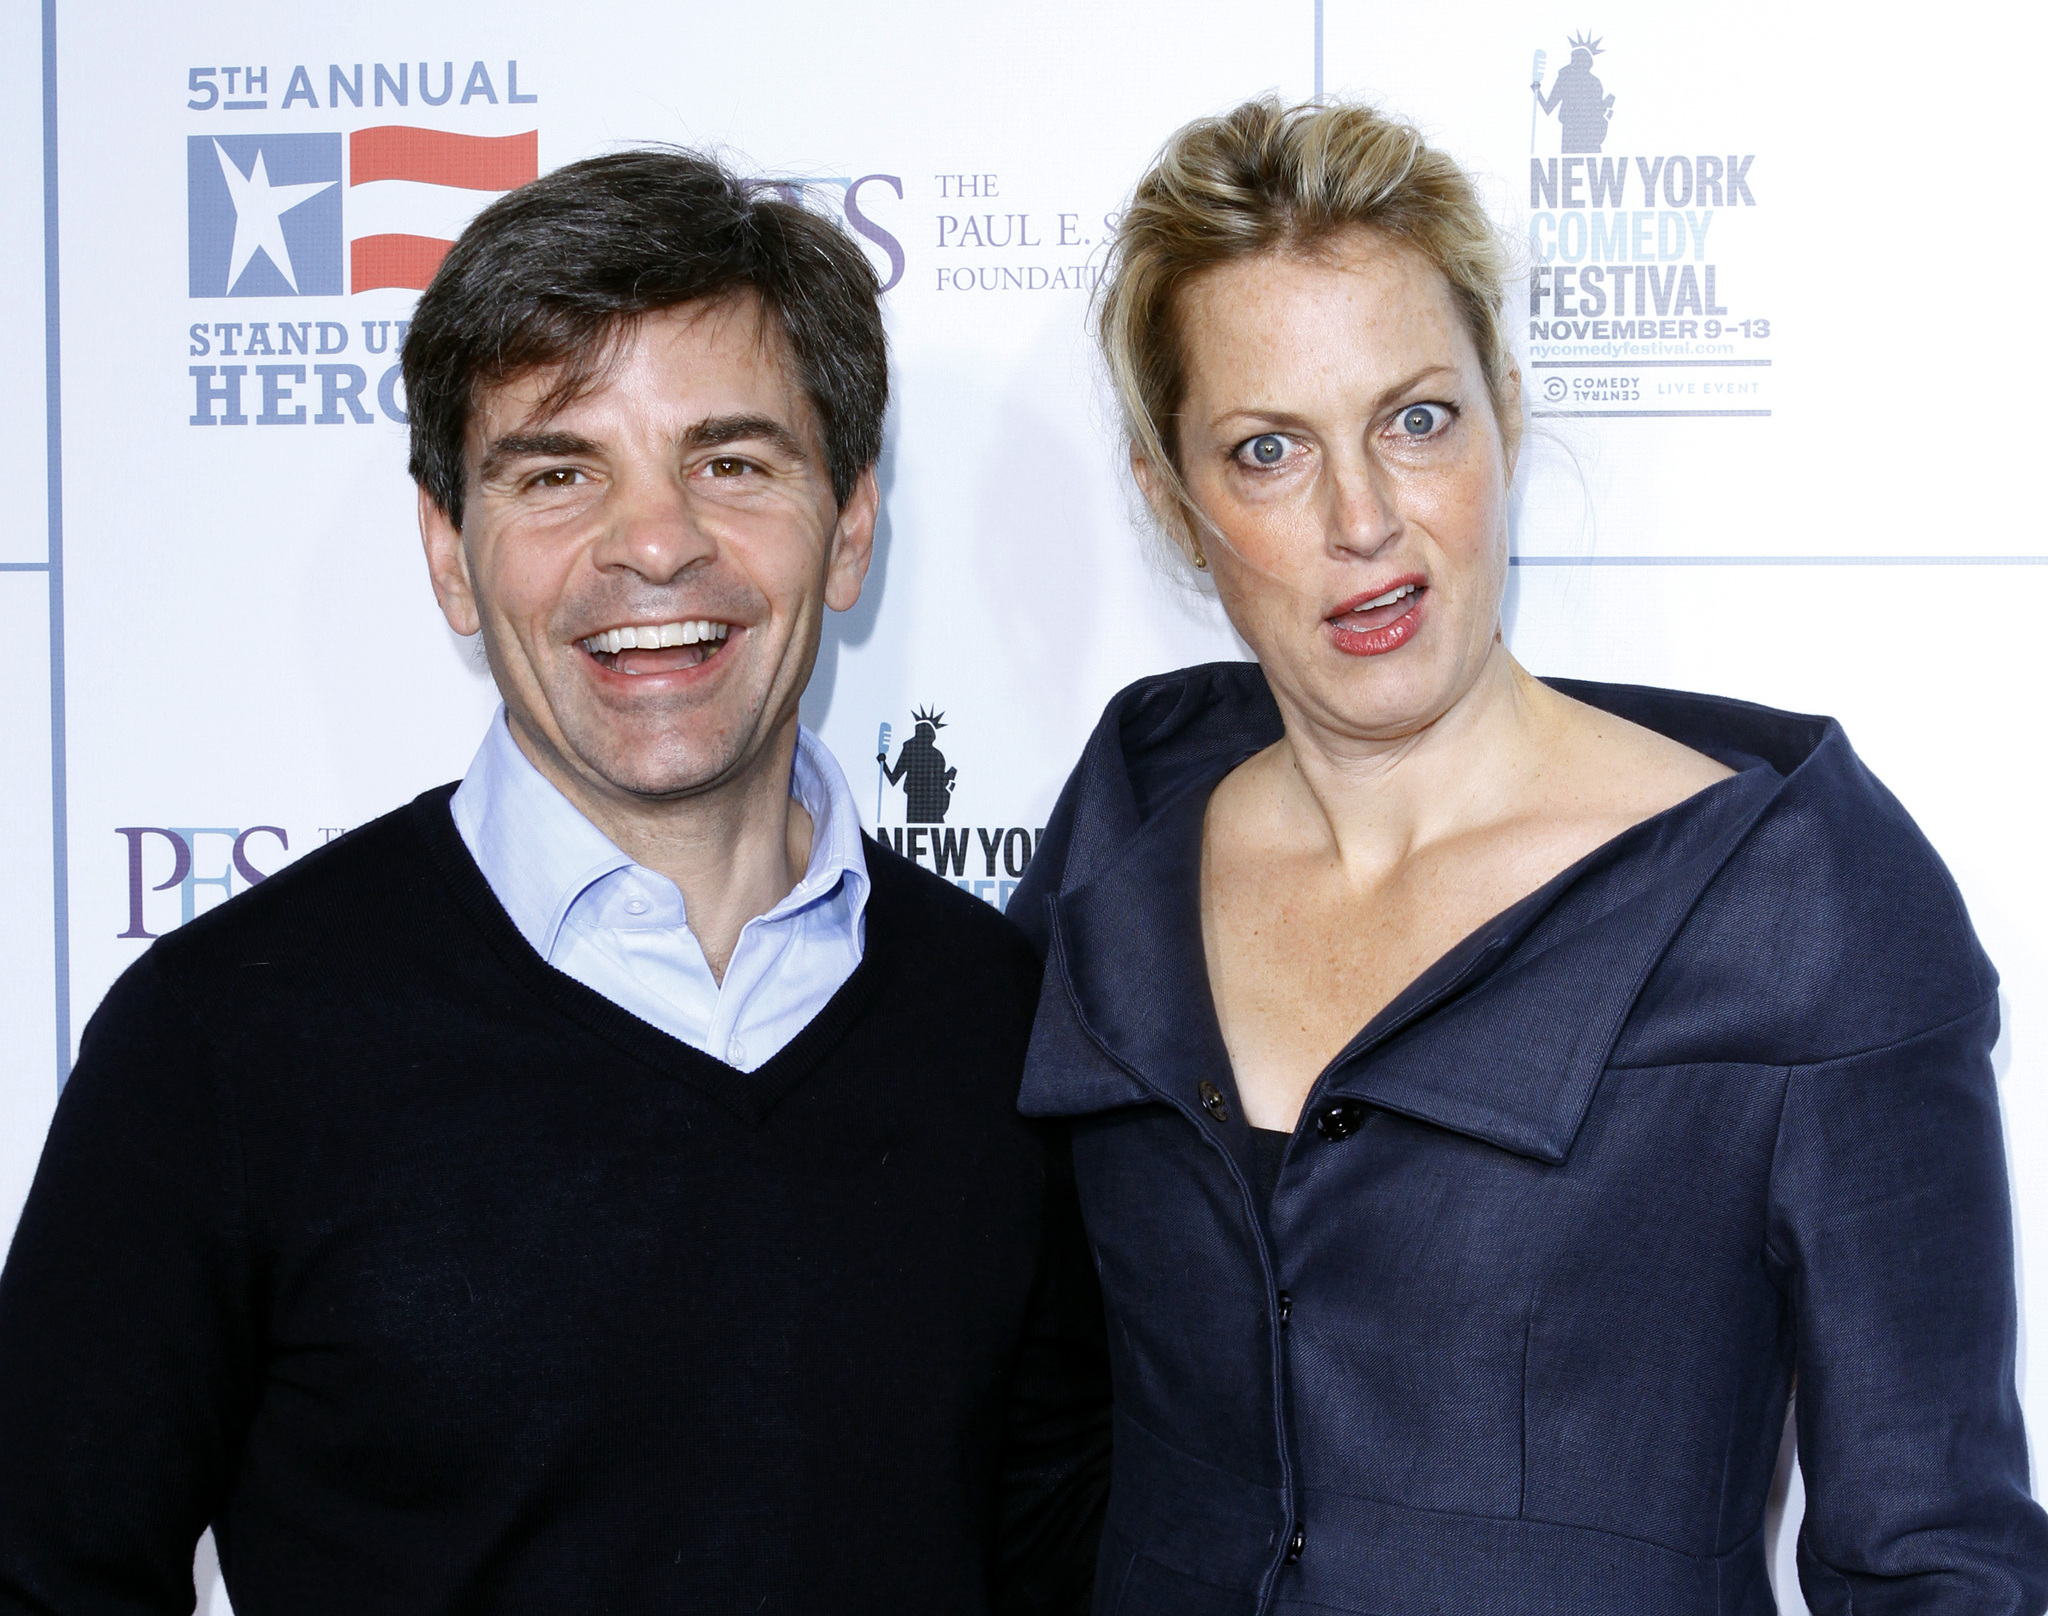 Alexandra Wentworth and George Stephanopoulos